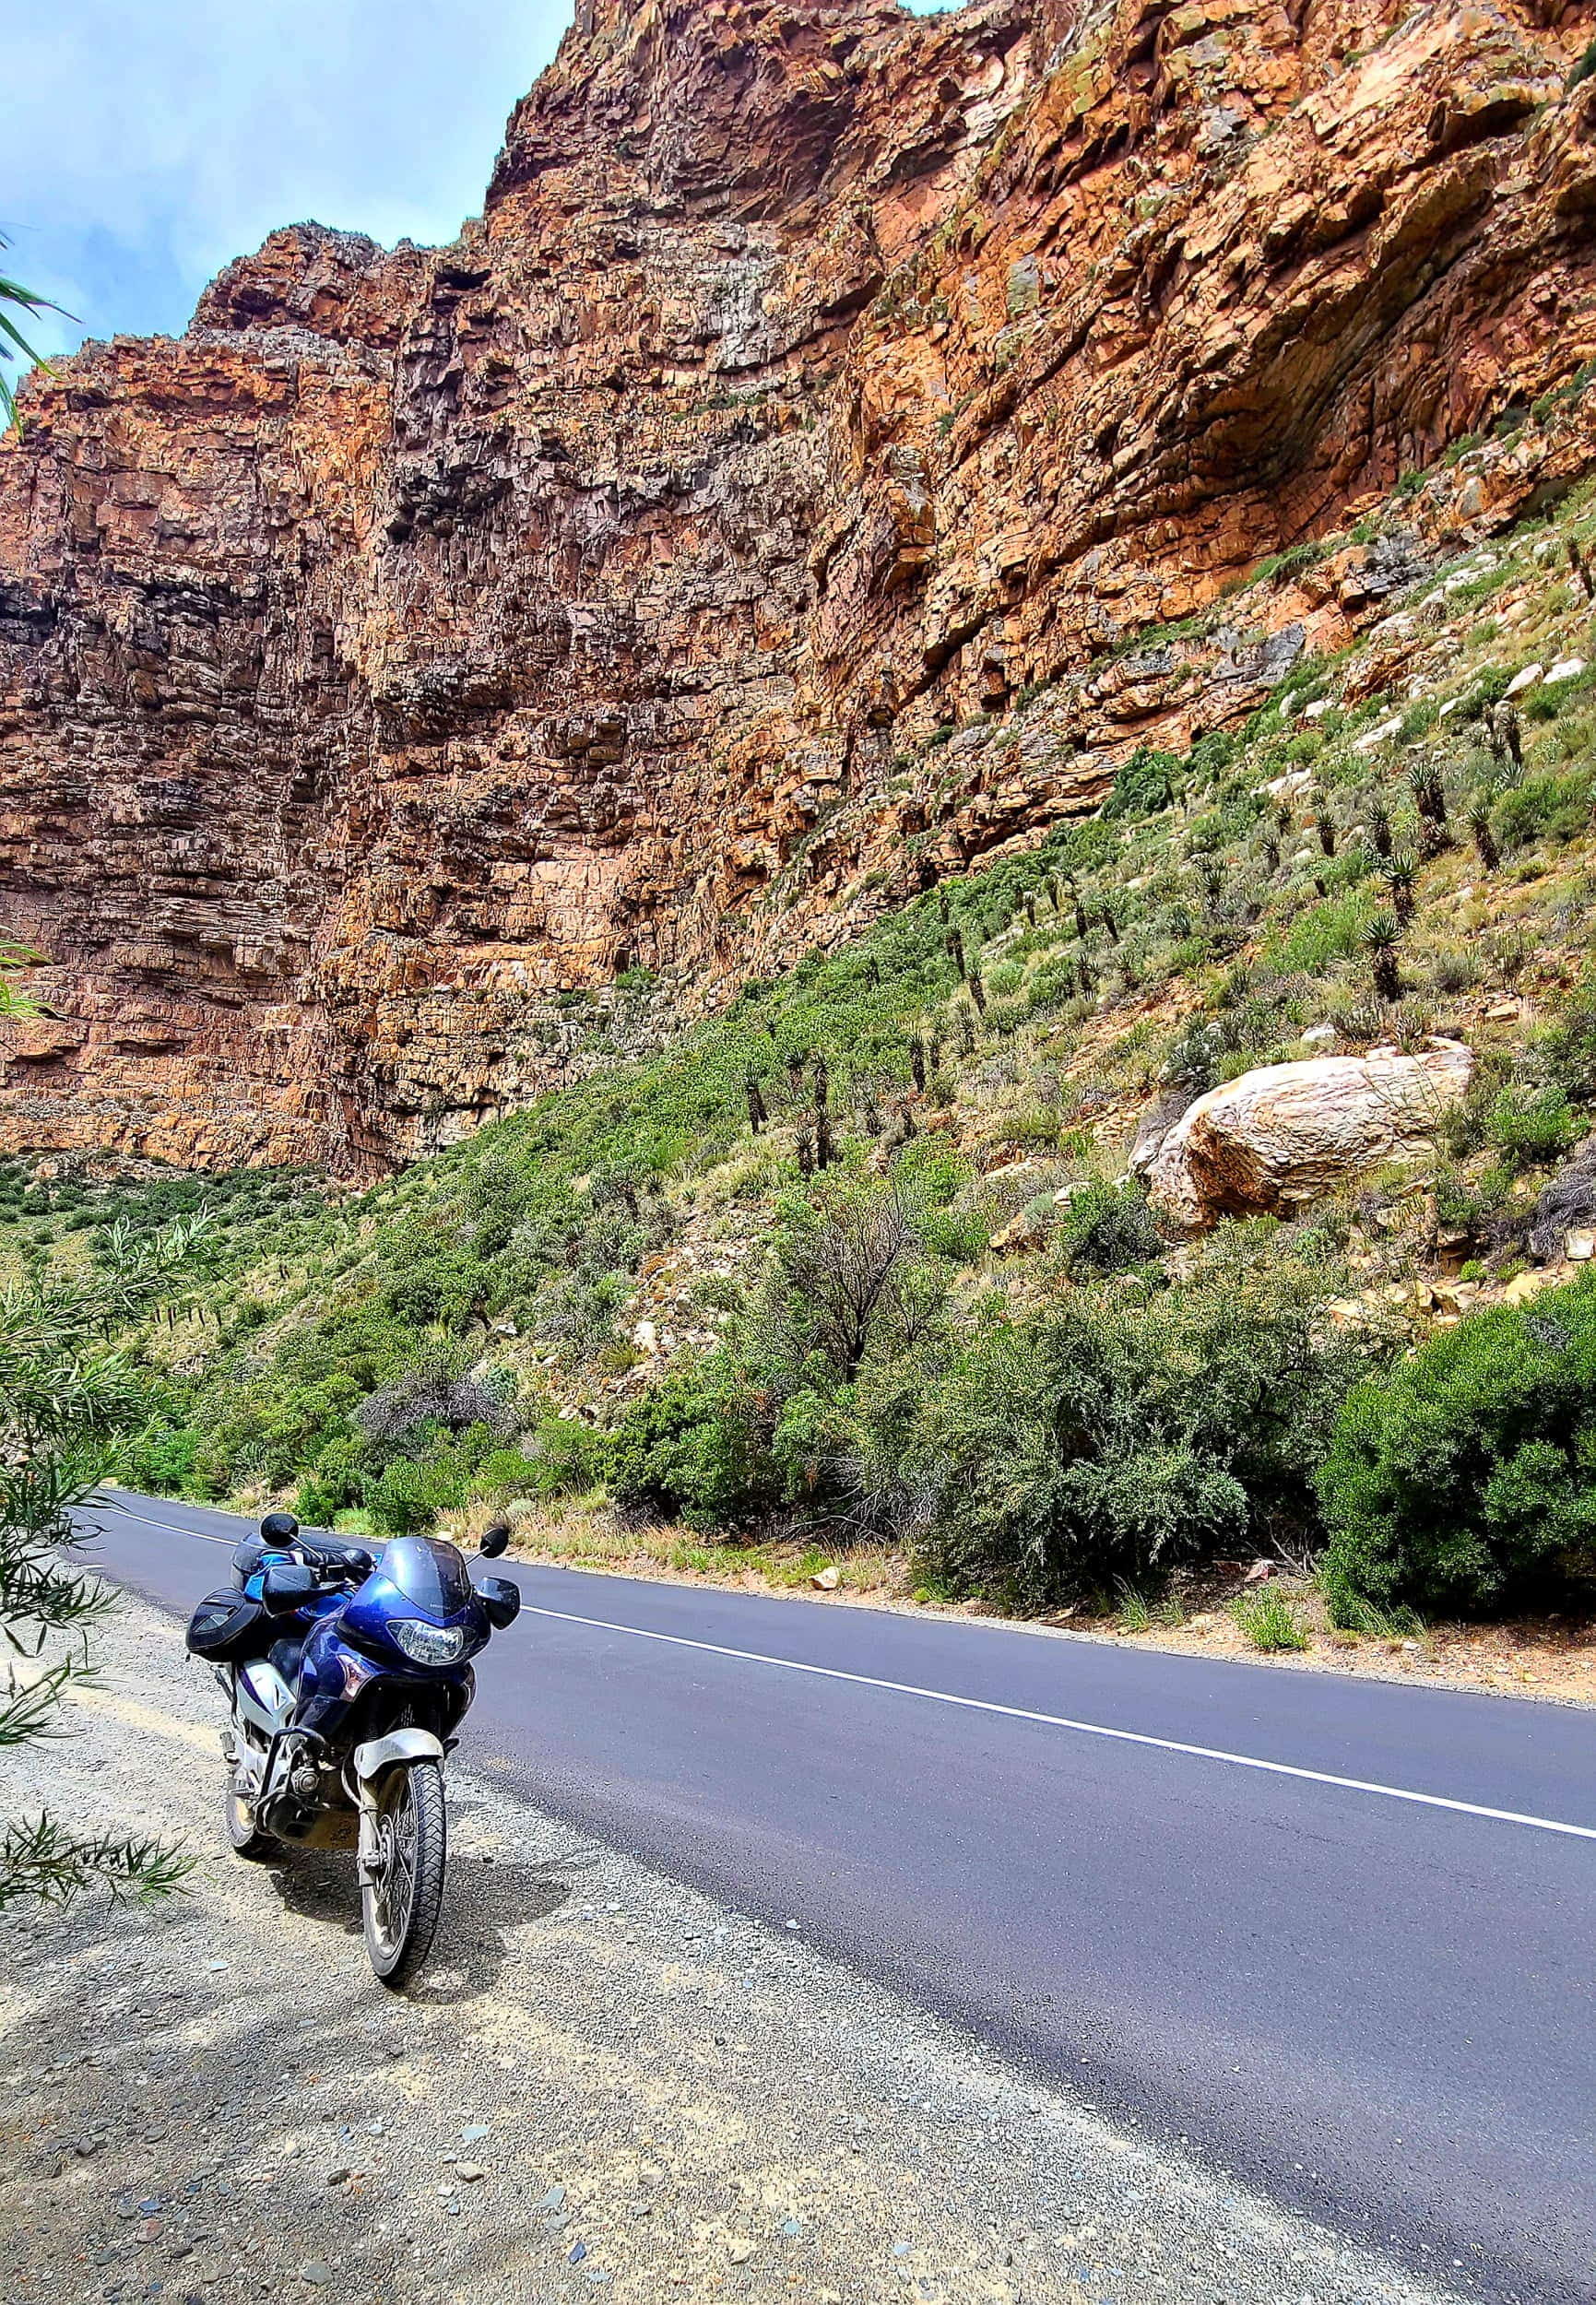 motorcycle parked on a  road going through a deep canyon